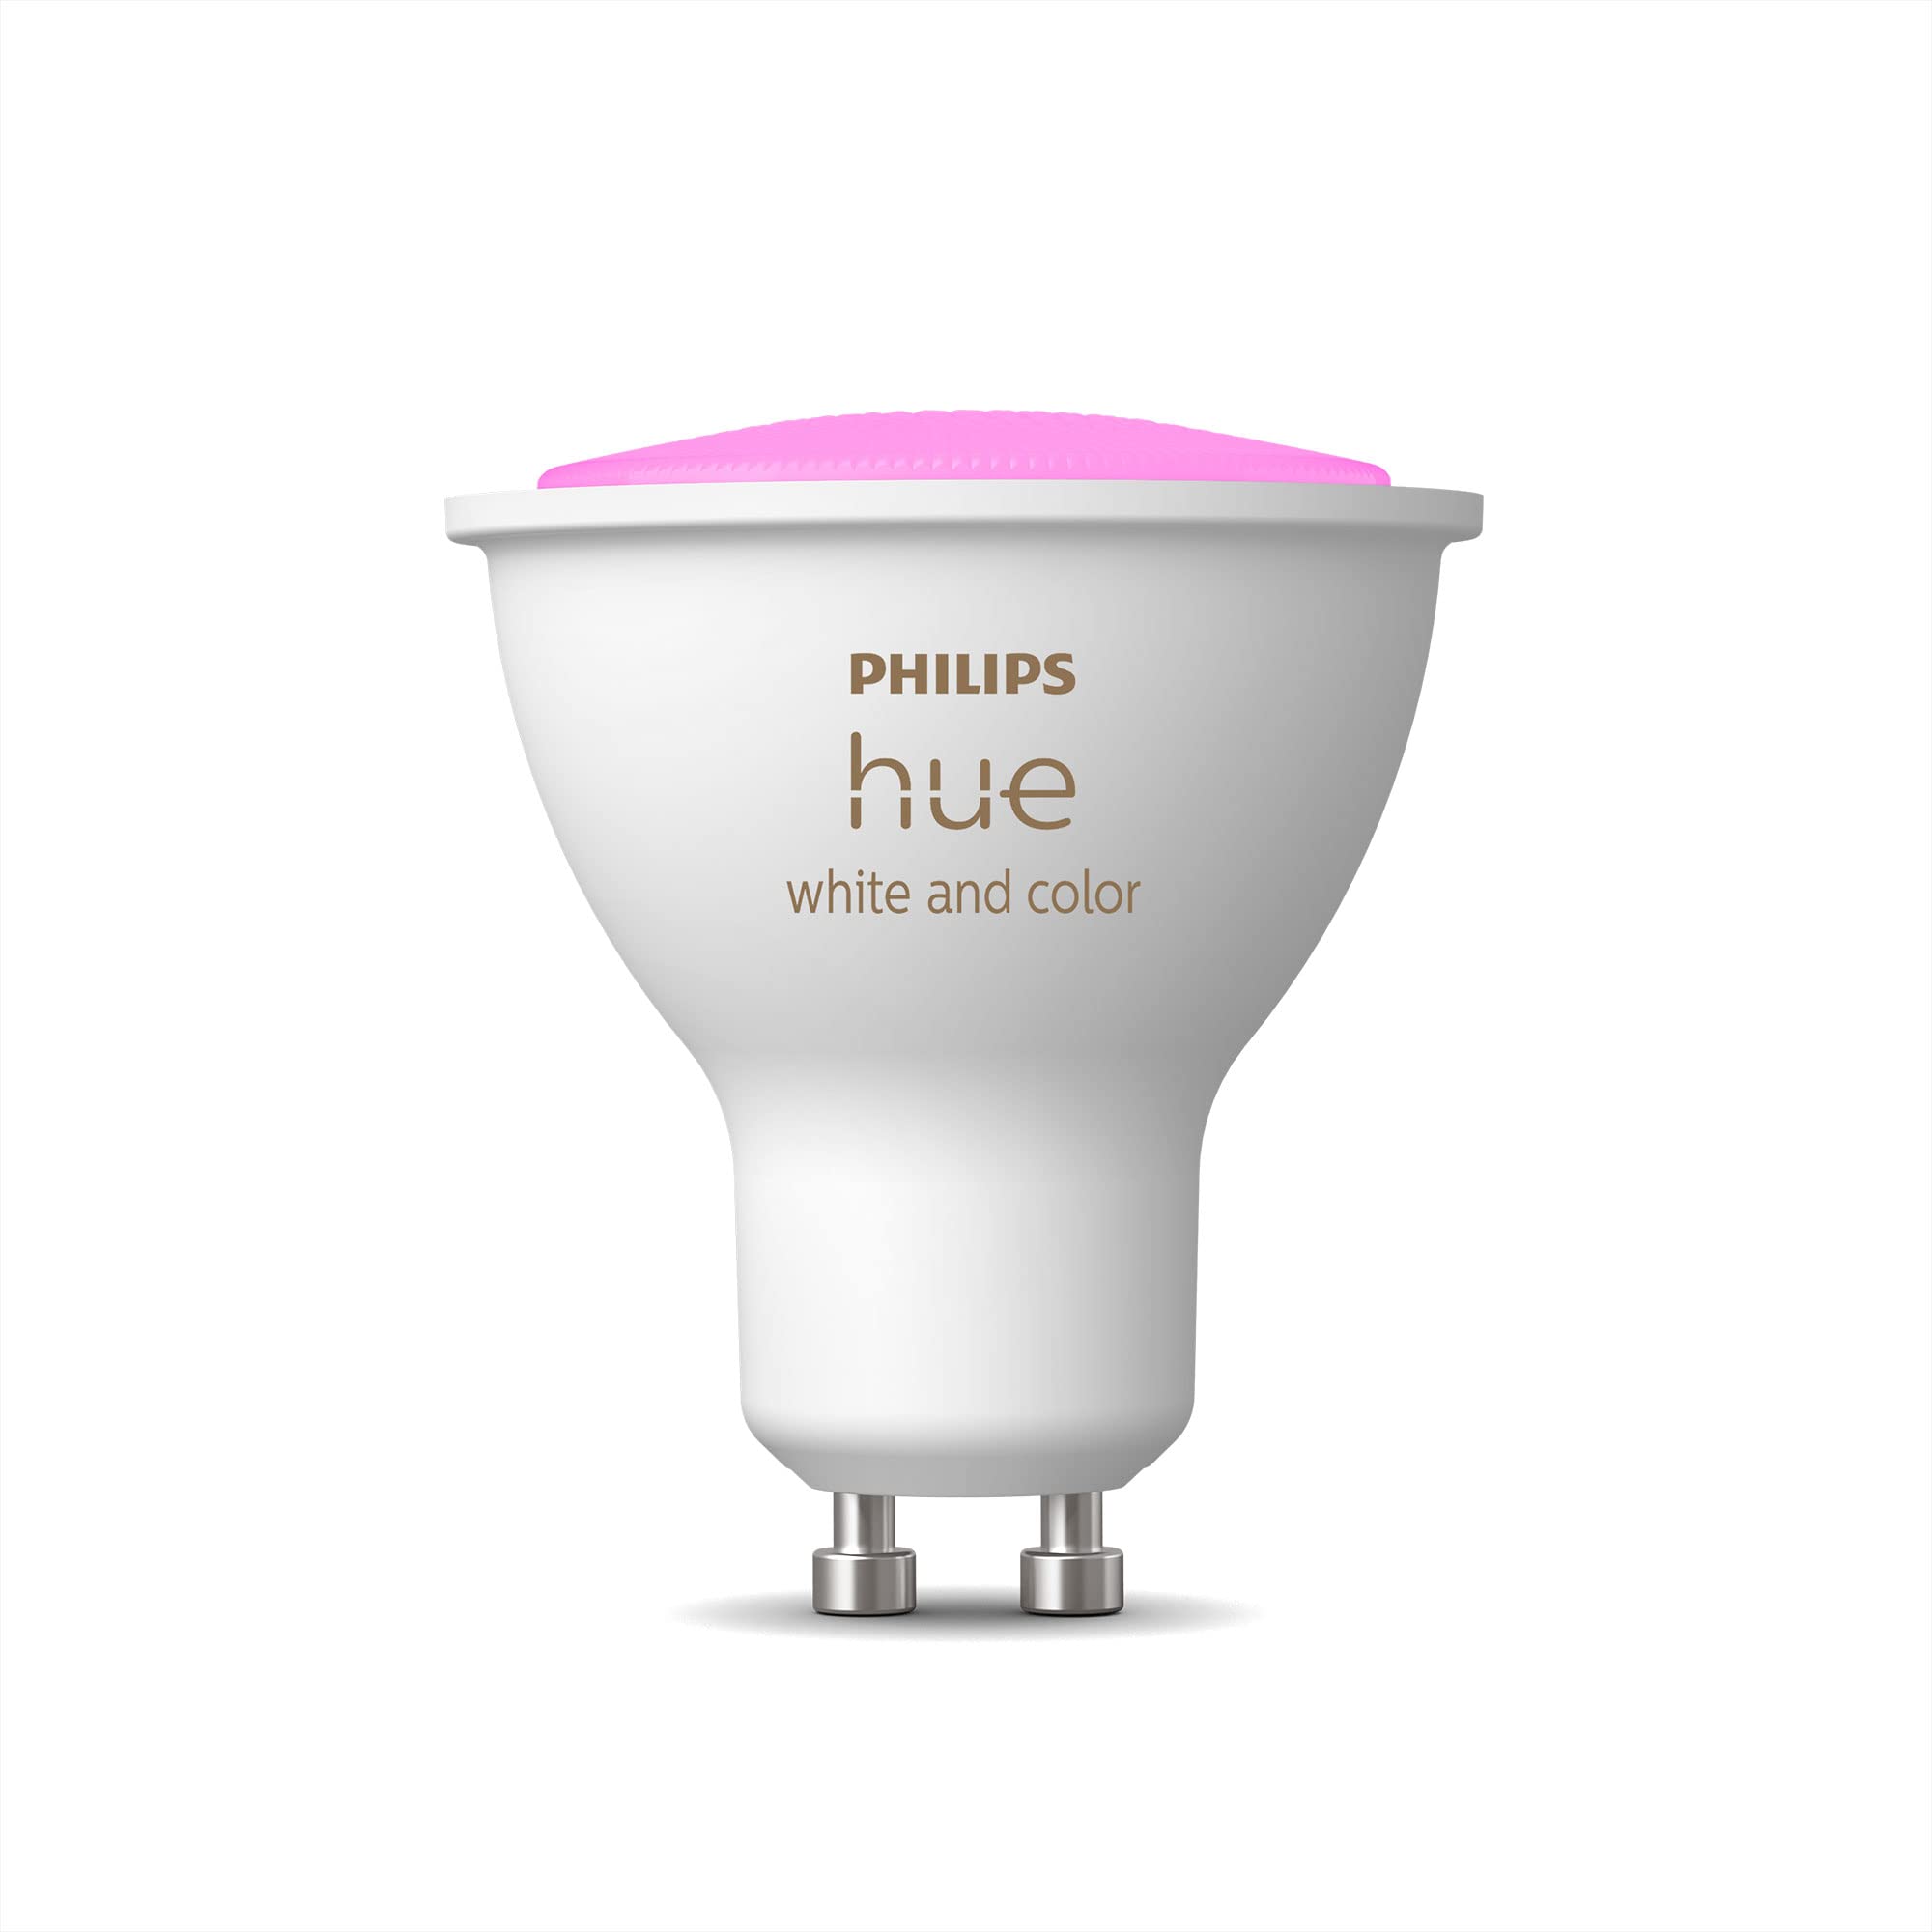 Philips Hue White & Color Ambiance LED Smart GU10 Bulb & Smart Dimmer Switch and Remote, Installation-Free, Smart Home, Exclusively Smart Lights